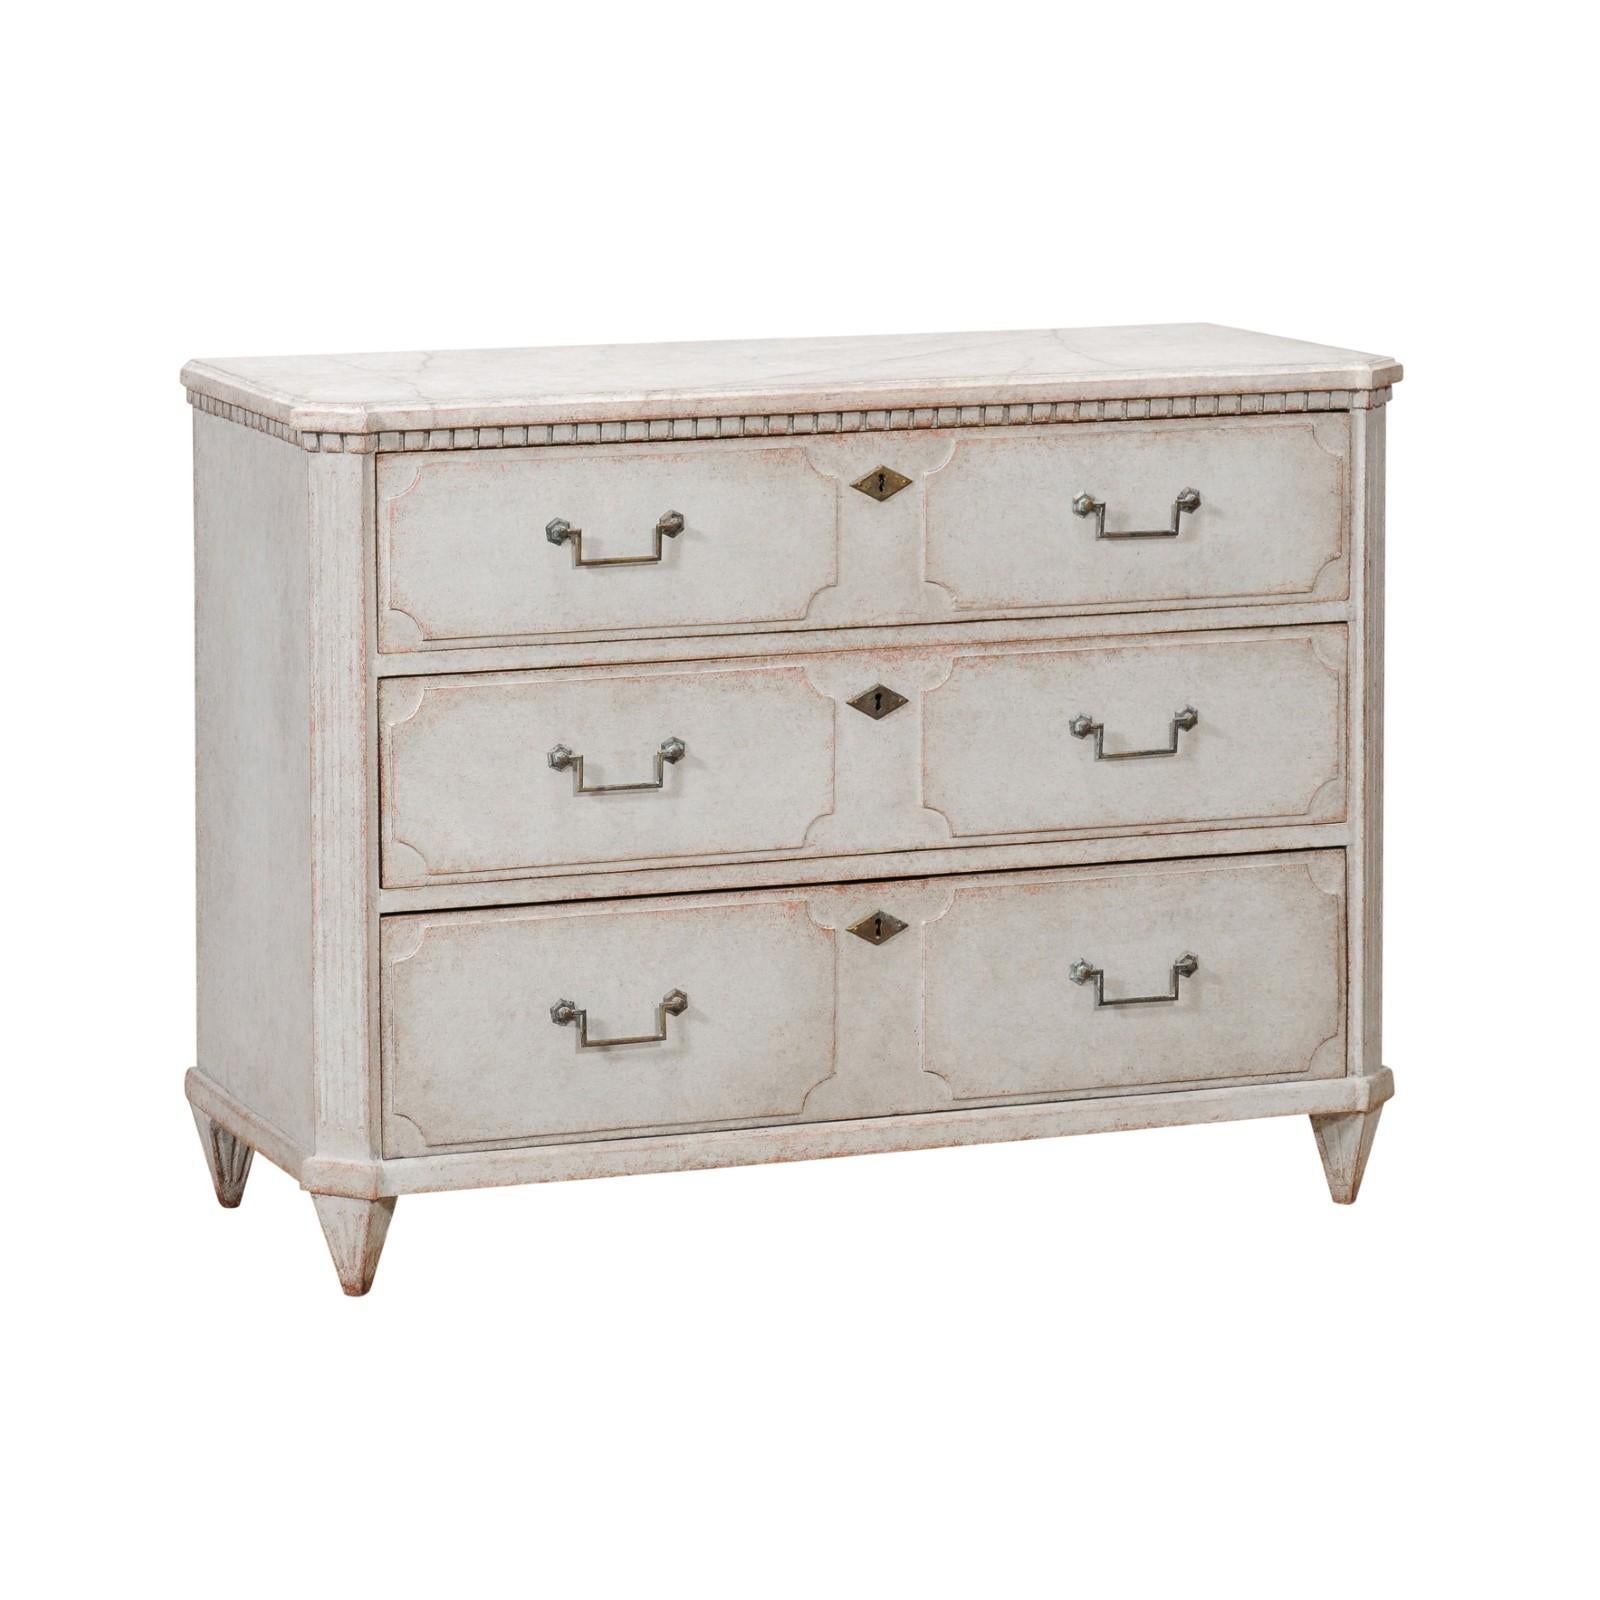 1860s Swedish Gustavian Style Painted Three-Drawer Chest with Dentil Molding 7